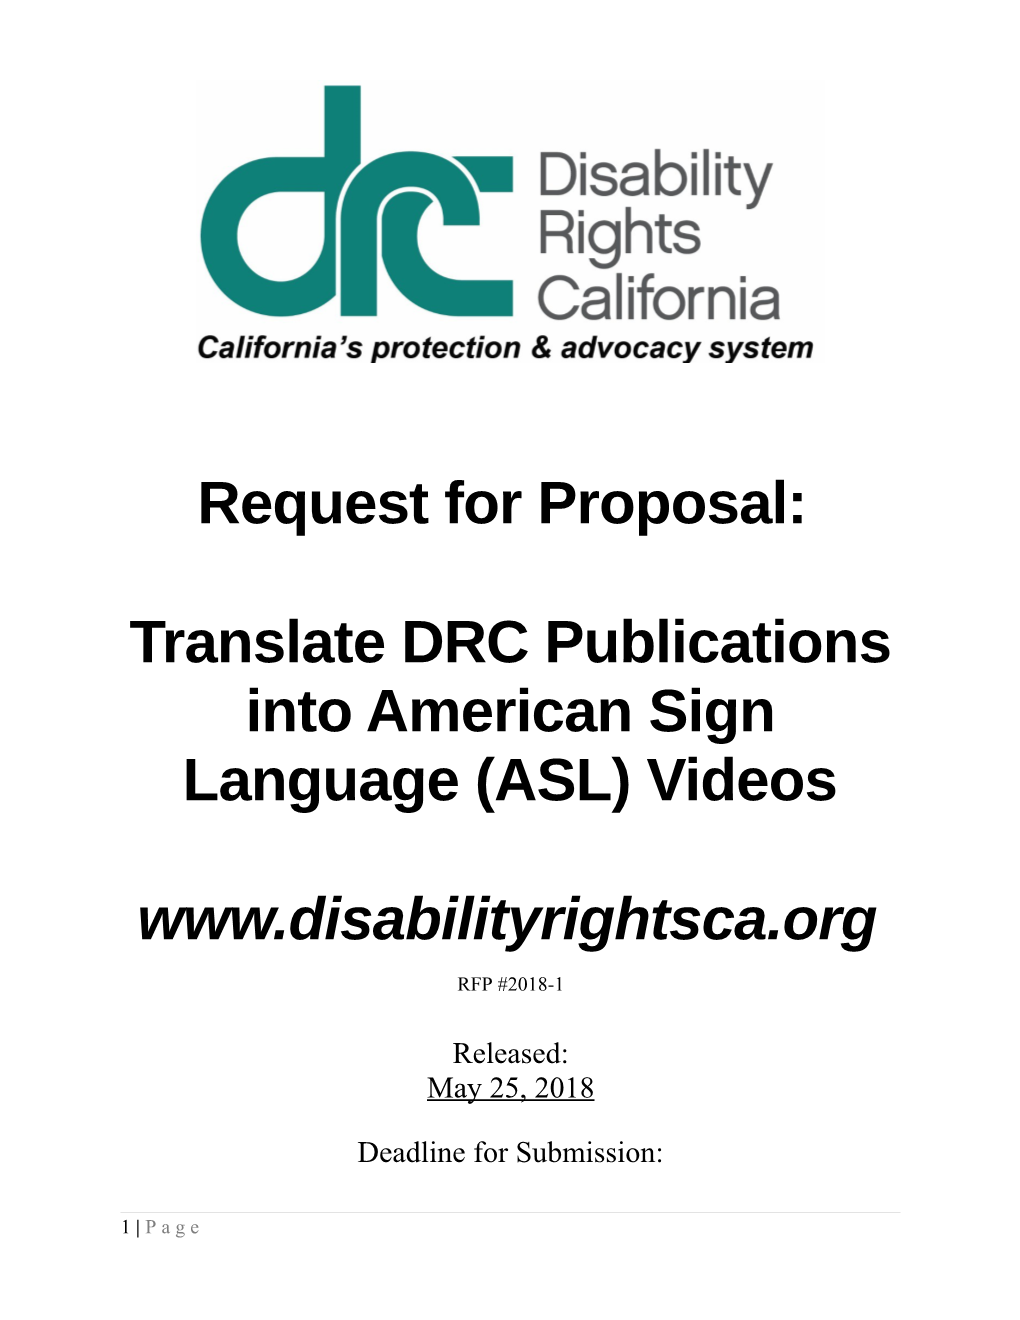 Translate DRC Publications Into American Sign Language (ASL)Videos